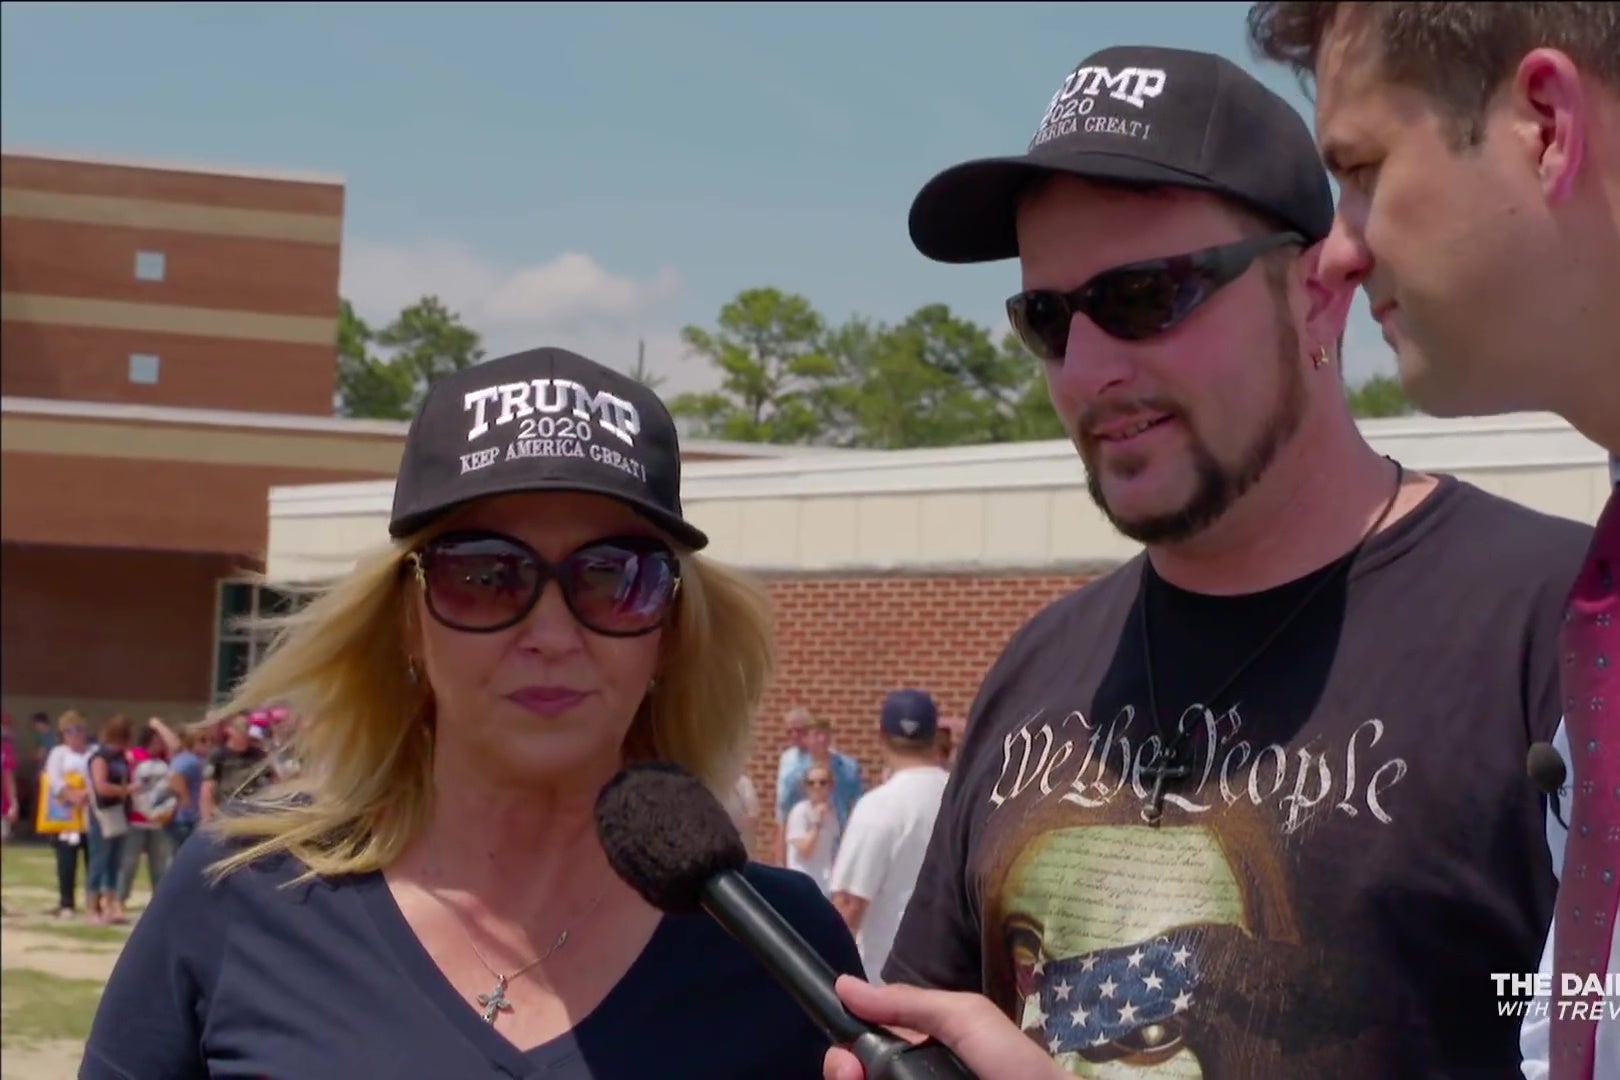 Michael Kosta interviewing two Trump supporters.